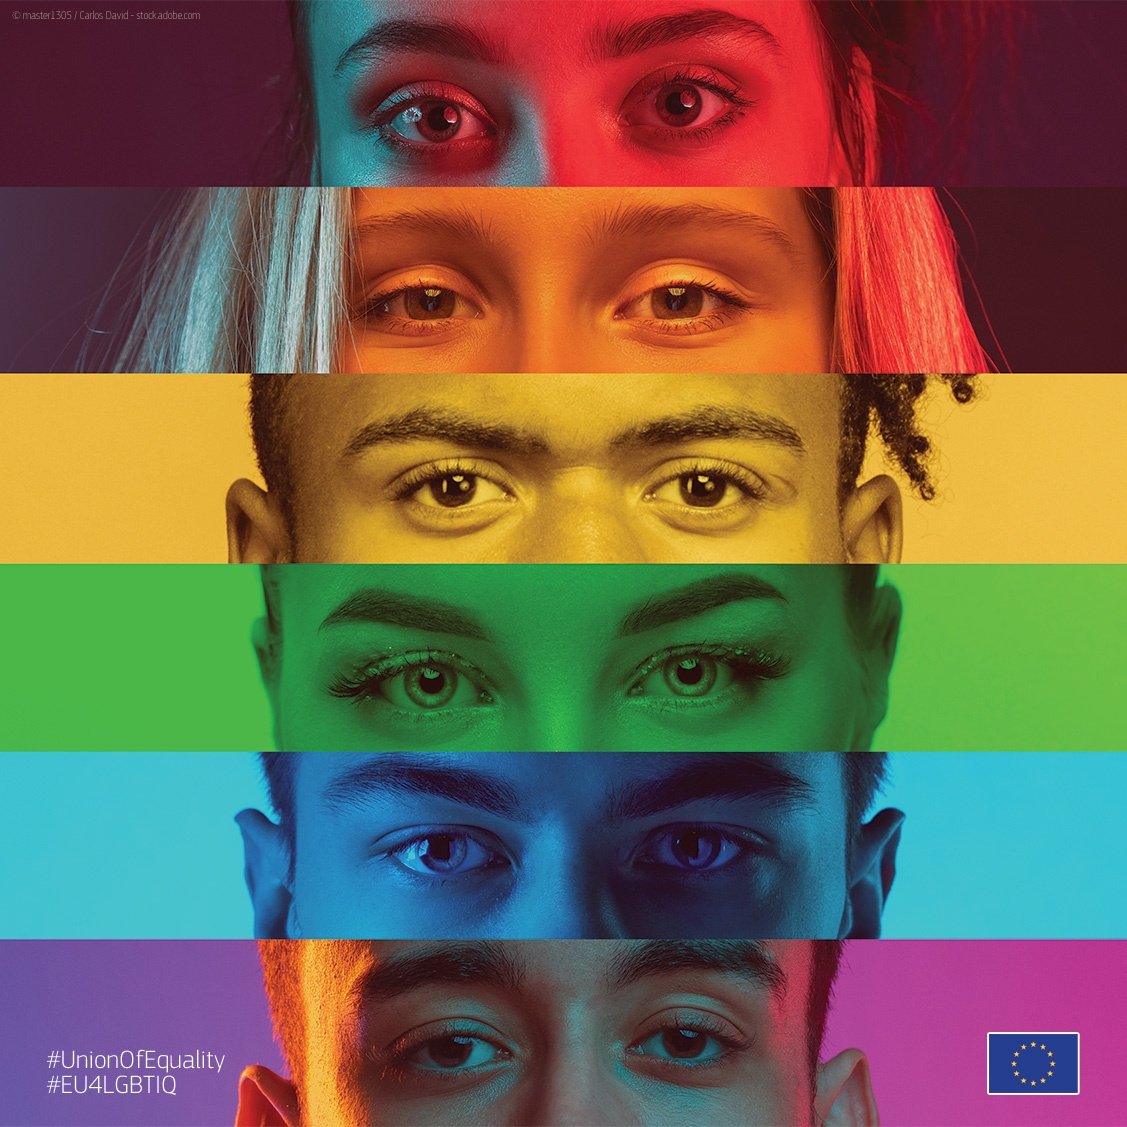 Today and every day: ❤️ We support love 🧡 We defend human rights 💛 We ban discrimination 💚 We ensure safety 💙 We tackle disinformation 💜 We build #UnionOfEquality But our work is not done👉 europa.eu/!Dggw9g #IDAHOT